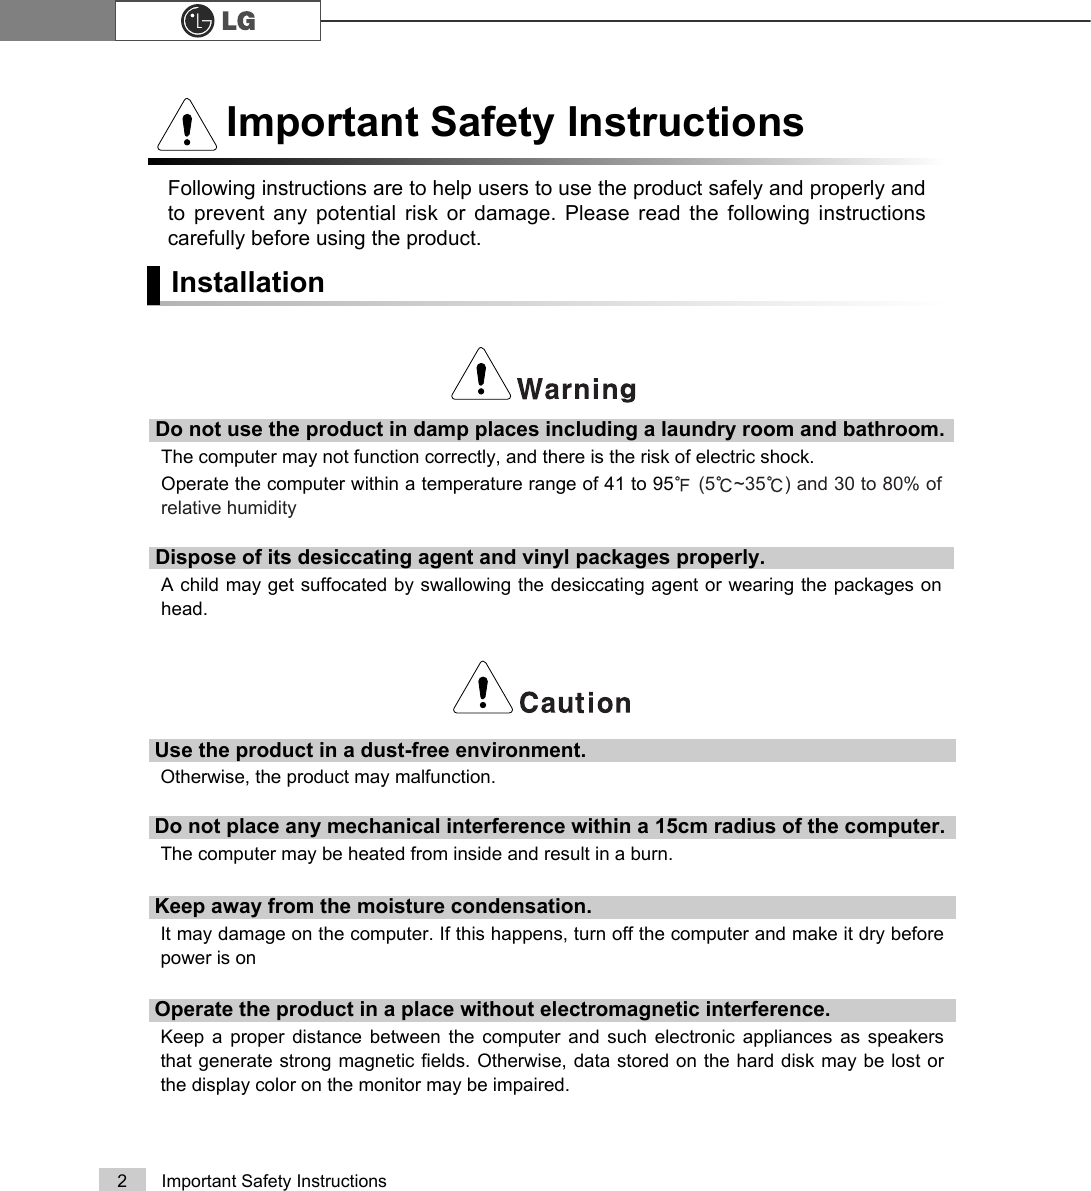 2 Important Safety InstructionsFollowing instructions are to help users to use the product safely and properly andto prevent any potential risk or damage. Please read the following instructionscarefully before using the product.InstallationImportant Safety InstructionsDo not use the product in damp places including a laundry room and bathroom. The computer may not function correctly, and there is the risk of electric shock.Operate the computer within a temperature range of 41 to 95ĕ(5Ë~35Ë) and 30 to 80% ofrelative humidityDispose of its desiccating agent and vinyl packages properly.A child may get suffocated by swallowing the desiccating agent or wearing the packages onhead.Use the product in a dust-free environment.Otherwise, the product may malfunction.Do not place any mechanical interference within a 15cm radius of the computer.The computer may be heated from inside and result in a burn.Keep away from the moisture condensation.It may damage on the computer. If this happens, turn off the computer and make it dry beforepower is onOperate the product in a place without electromagnetic interference.Keep a proper distance between the computer and such electronic appliances as speakersthat generate strong magnetic fields. Otherwise, data stored on the hard disk may be lost orthe display color on the monitor may be impaired.